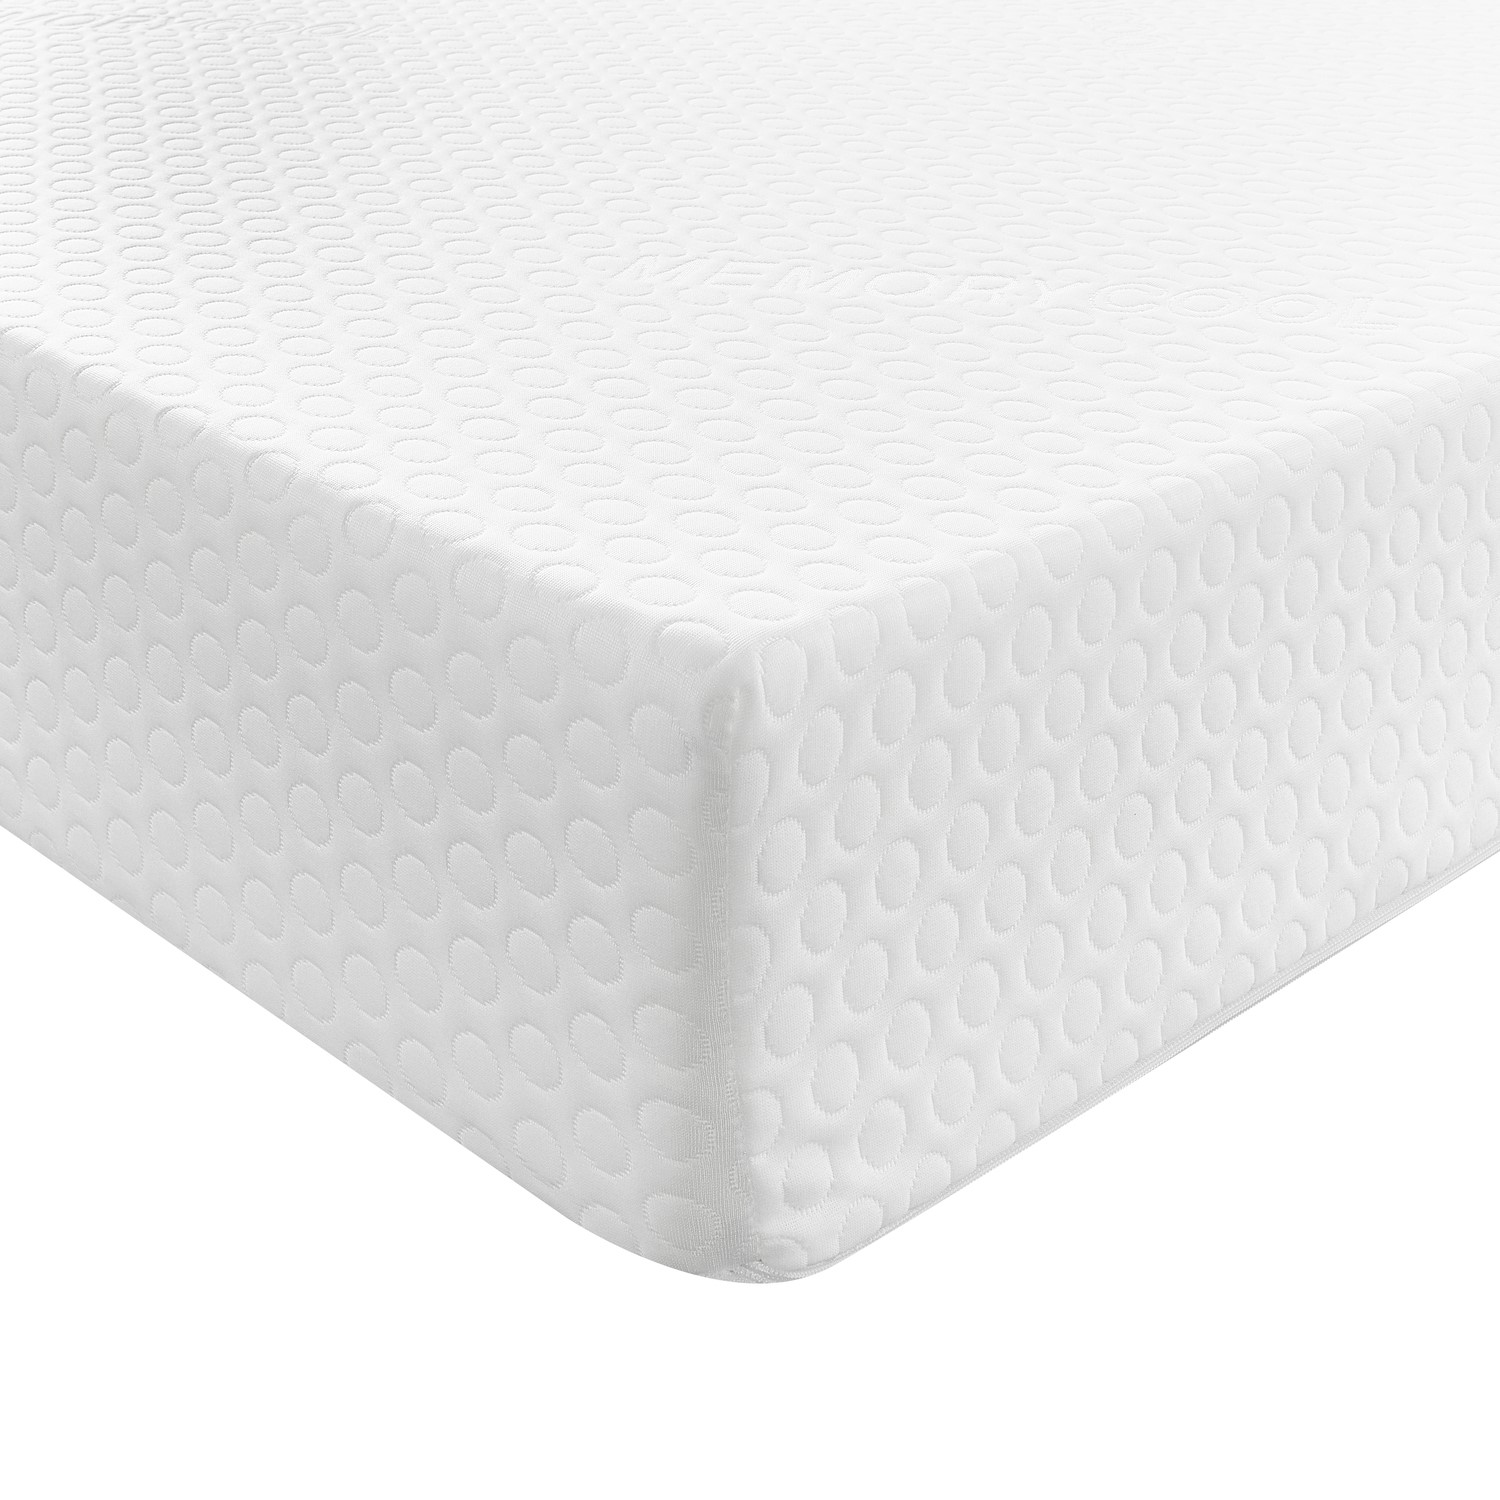 Photo of Single memory foam rolled hypoallergenic mattress with removable cover - aspire